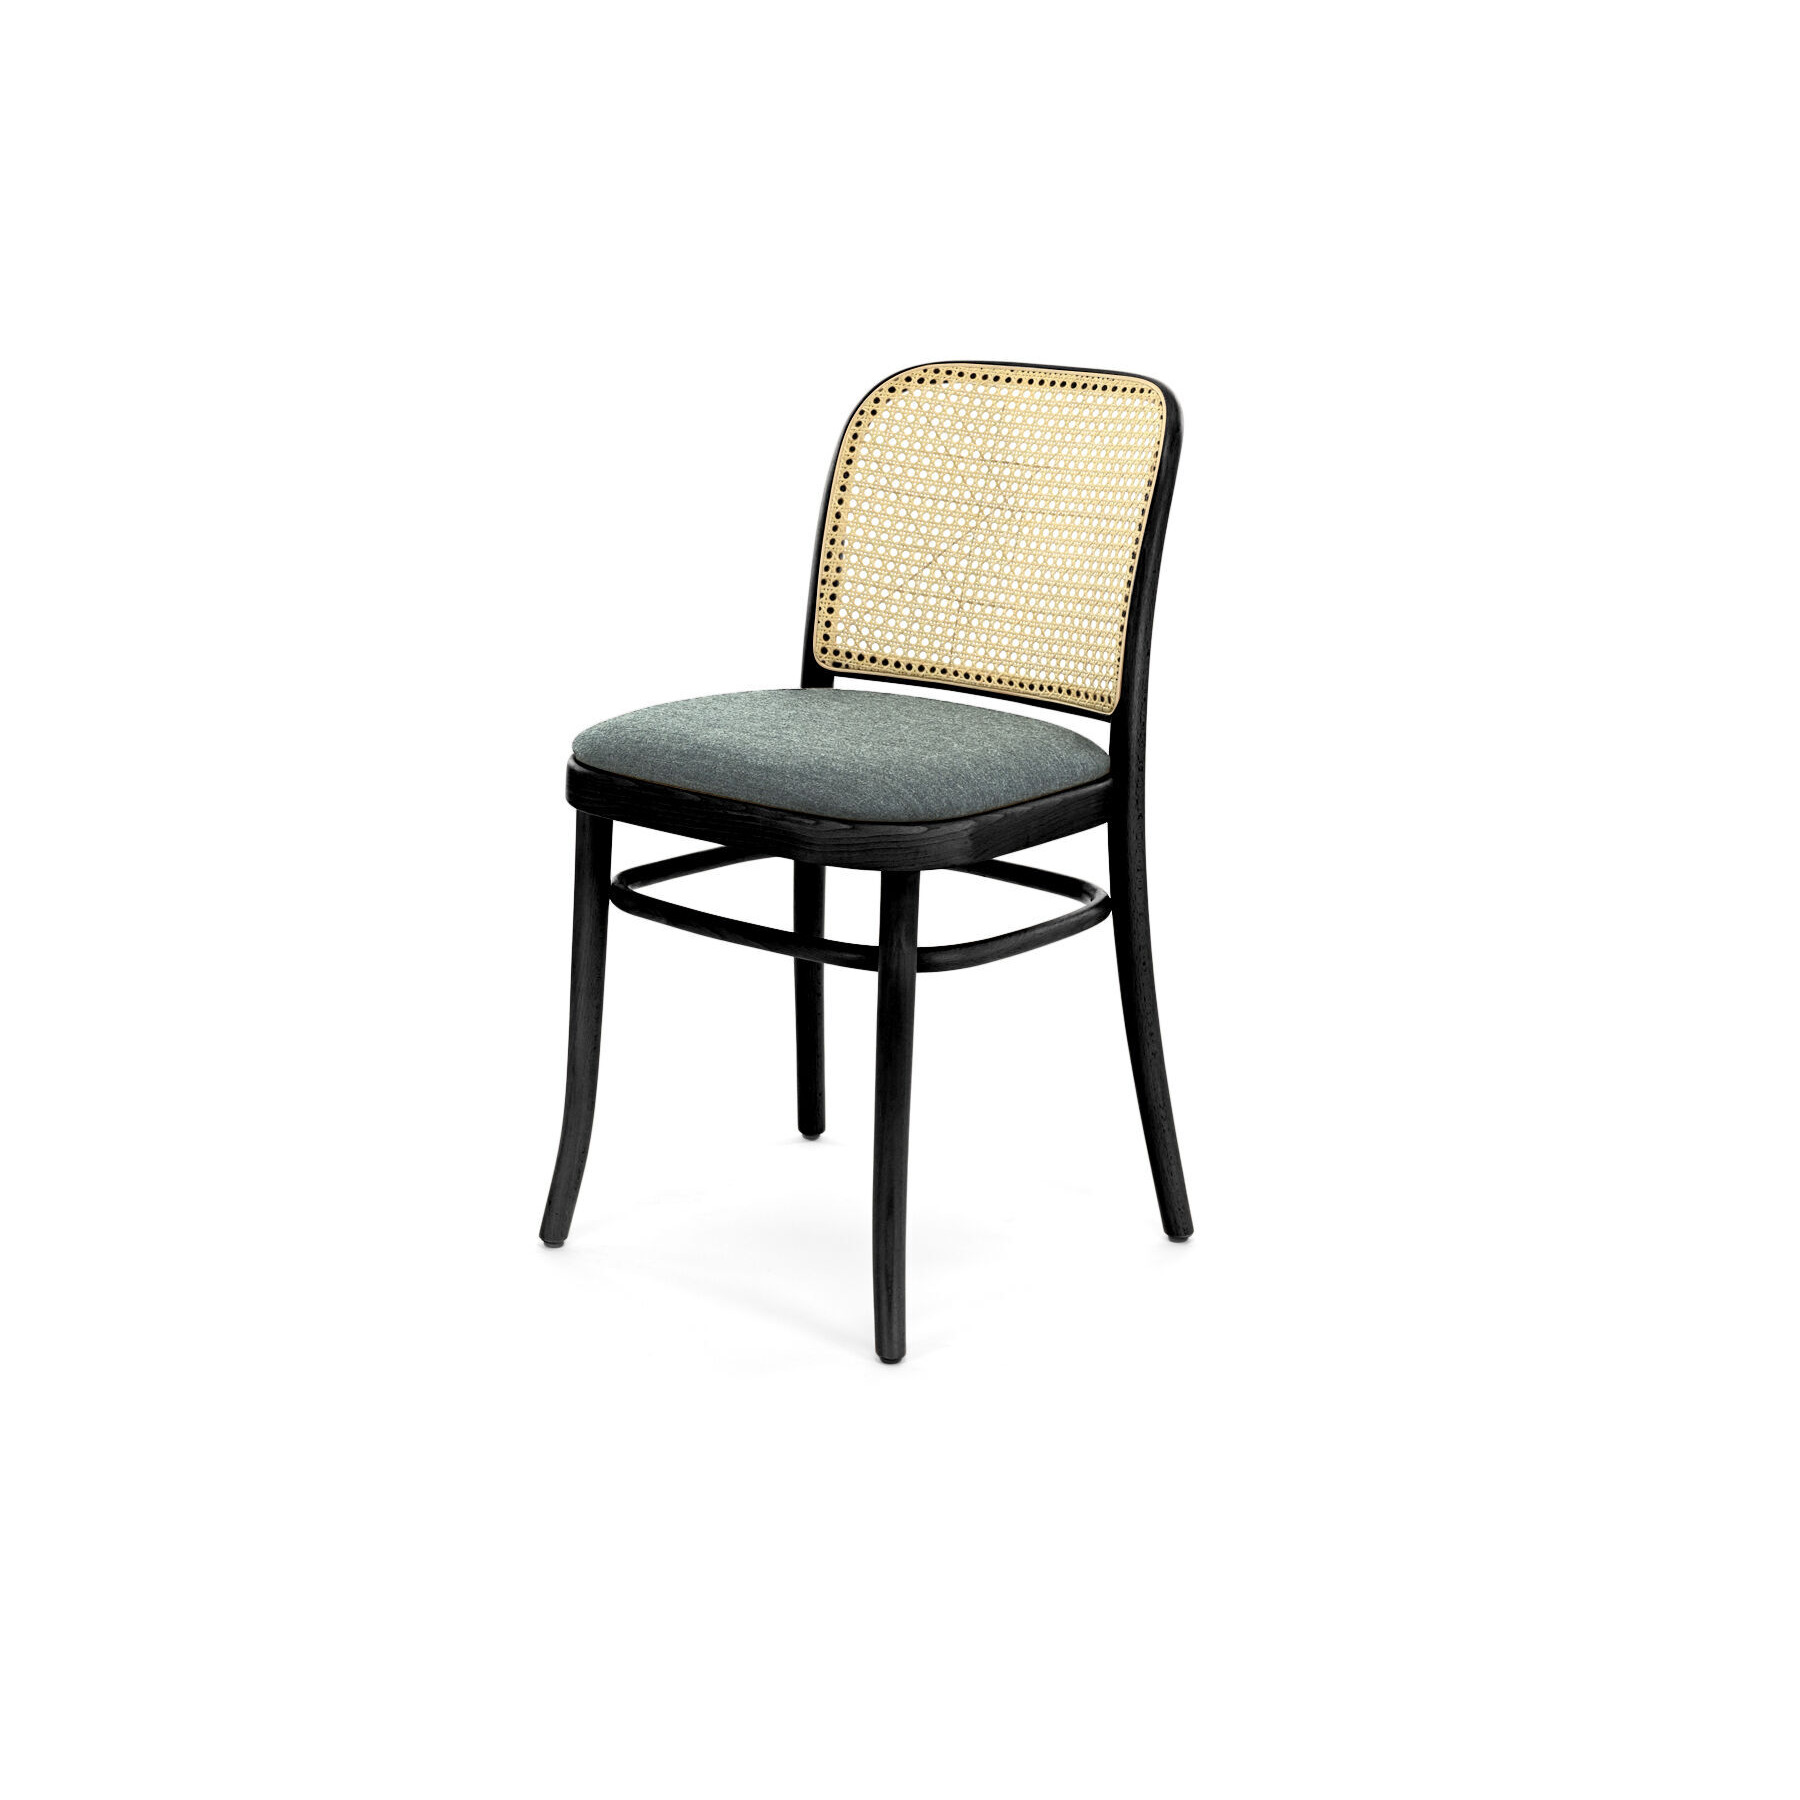 Madrid Cane Dining Chair, Cane Back and Upholstered Seat, Black